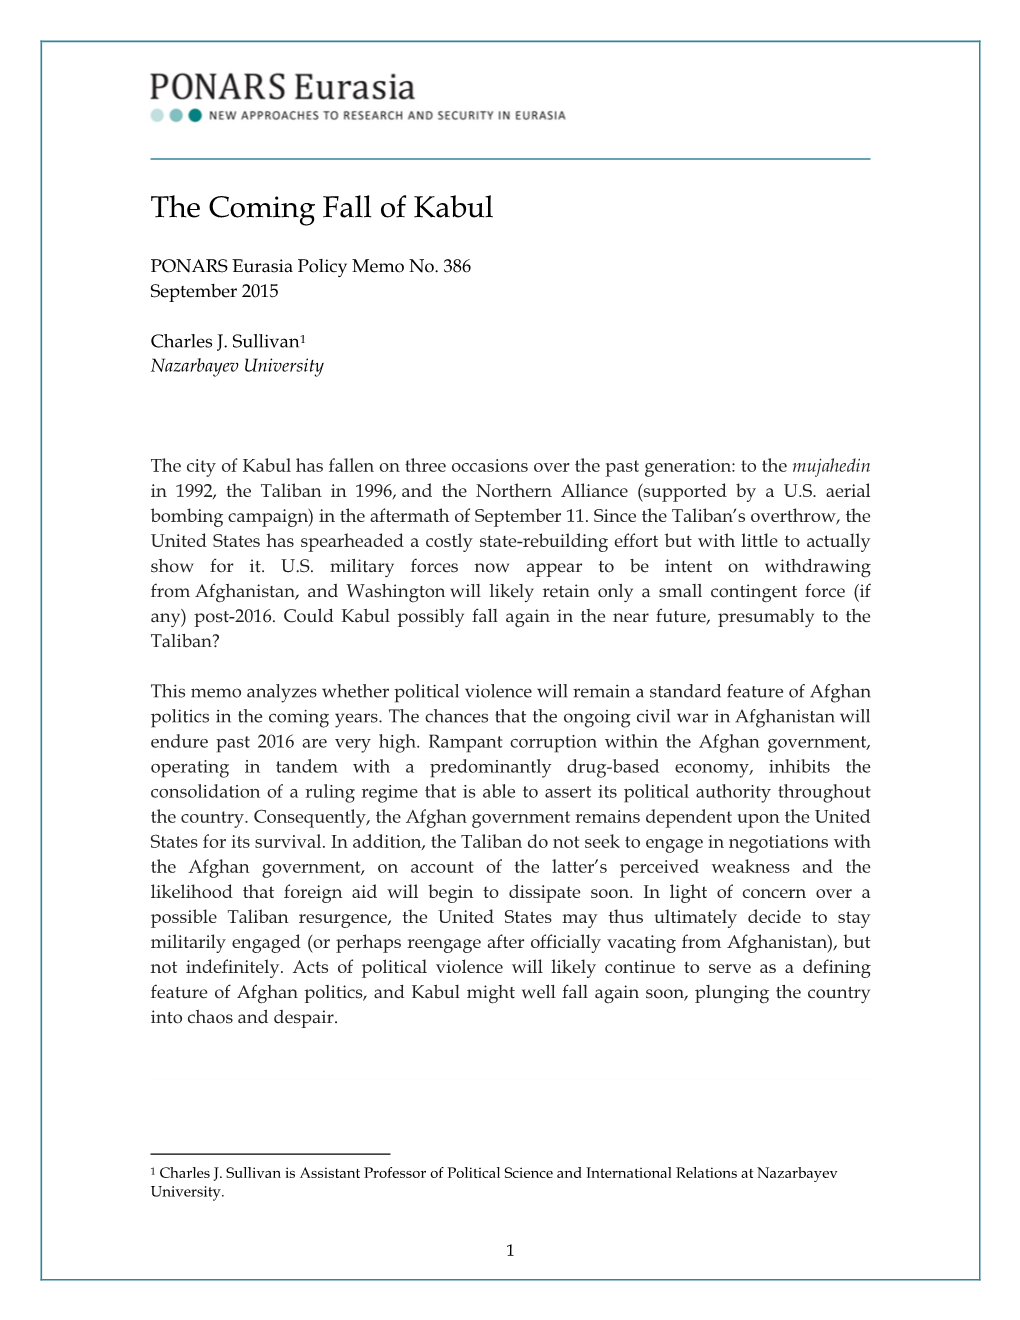 The Coming Fall of Kabul